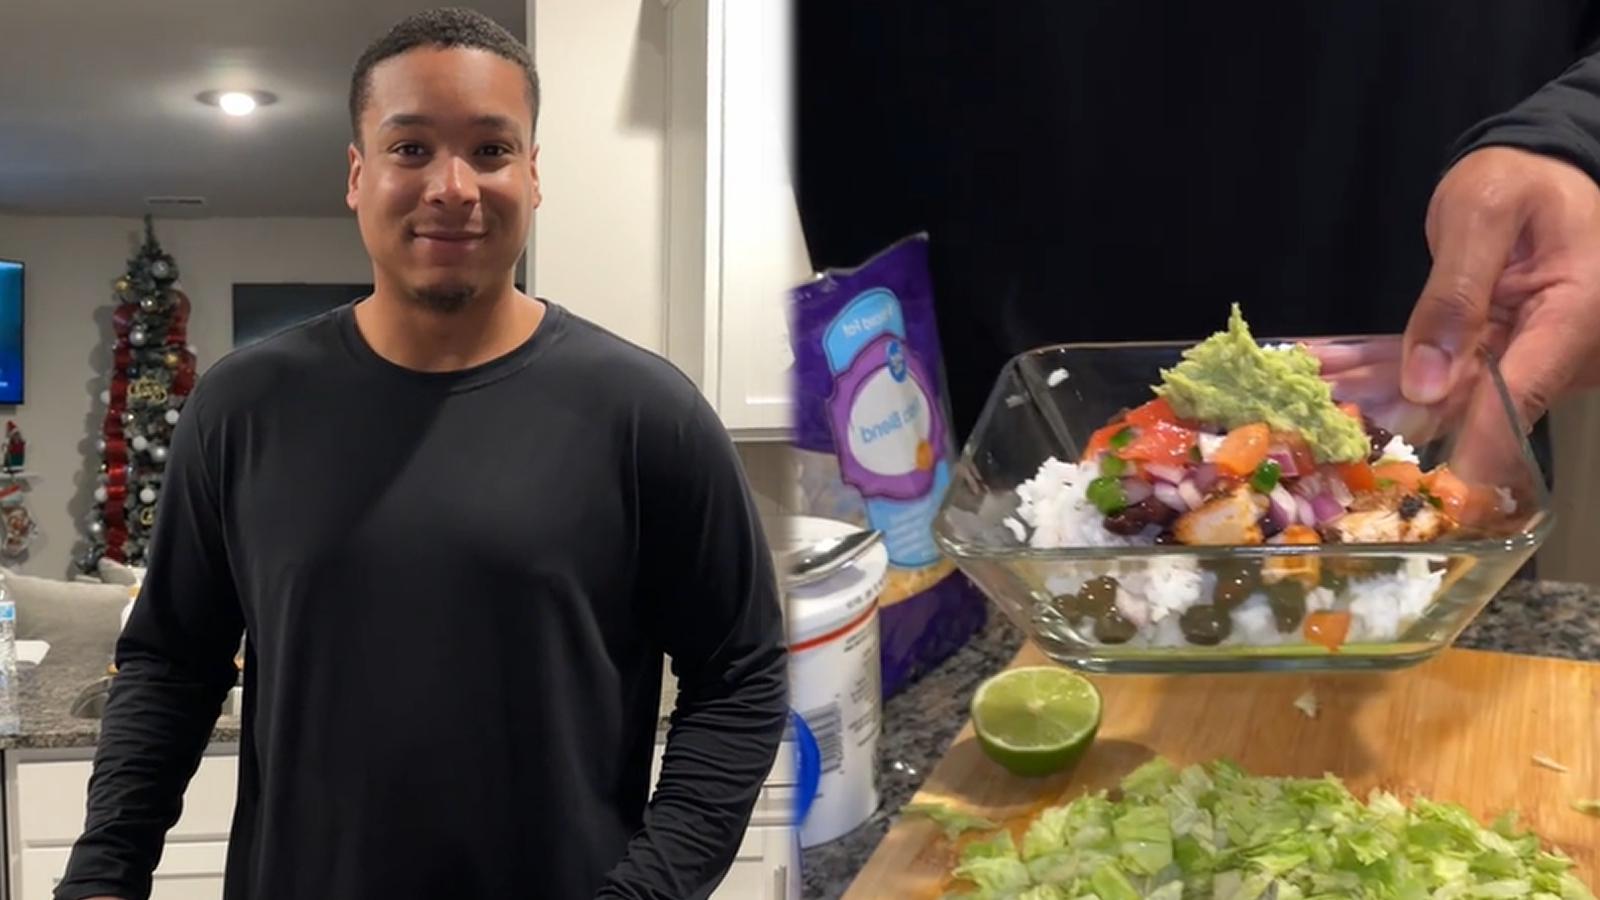 Man wows the internet after transforming kitchen into Chipotle restaurant for his wife